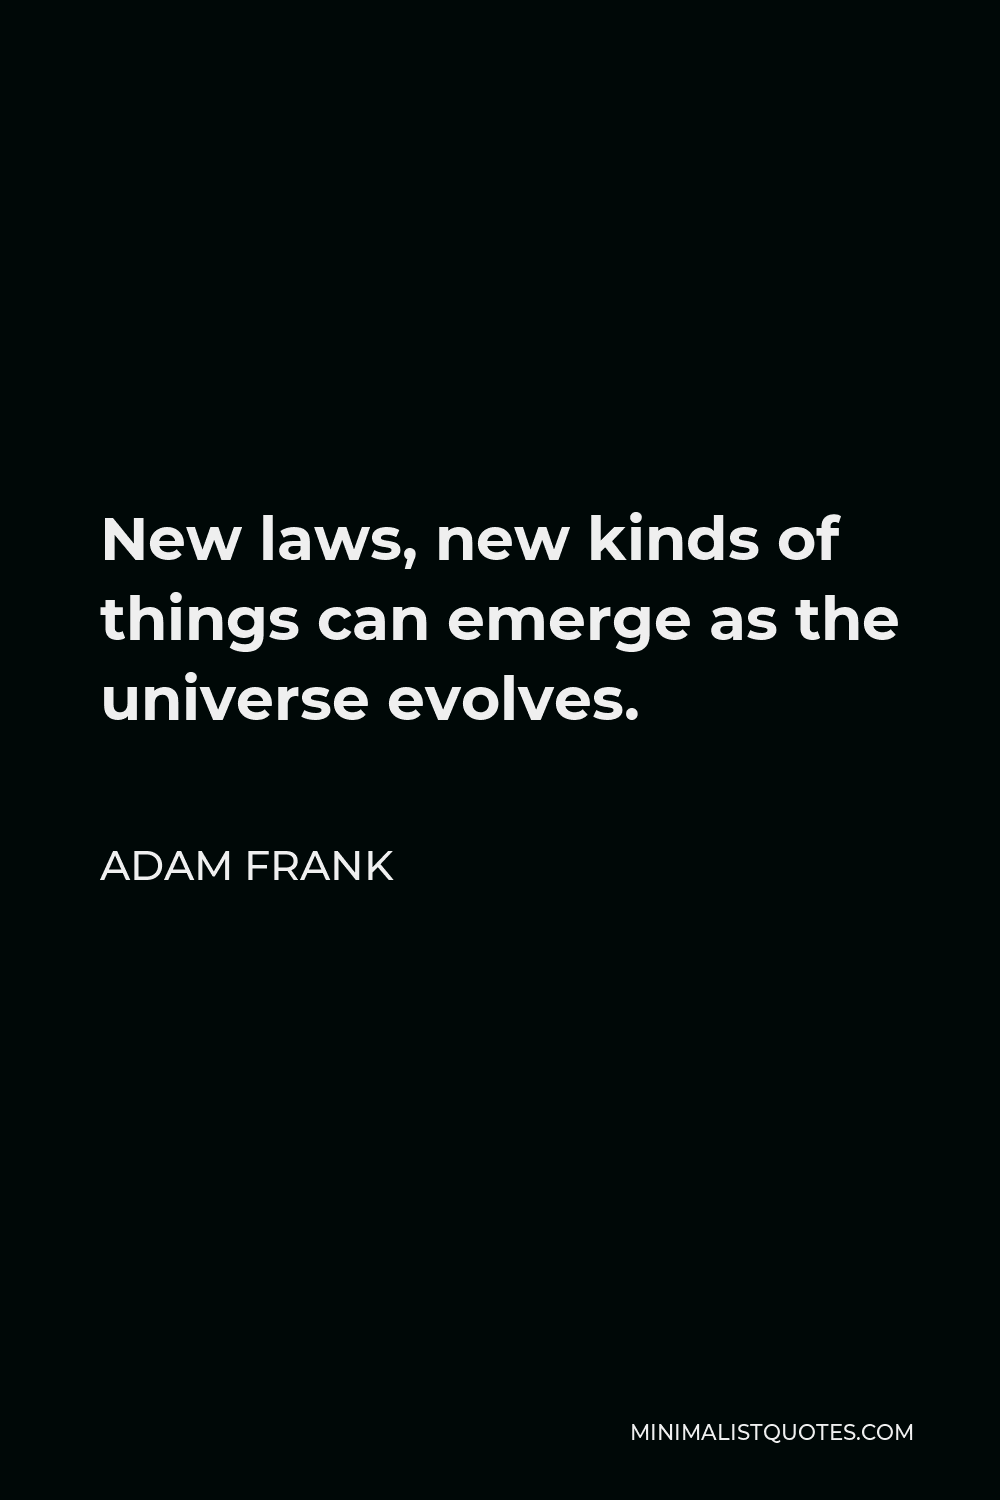 Adam Frank Quote - New laws, new kinds of things can emerge as the universe evolves.